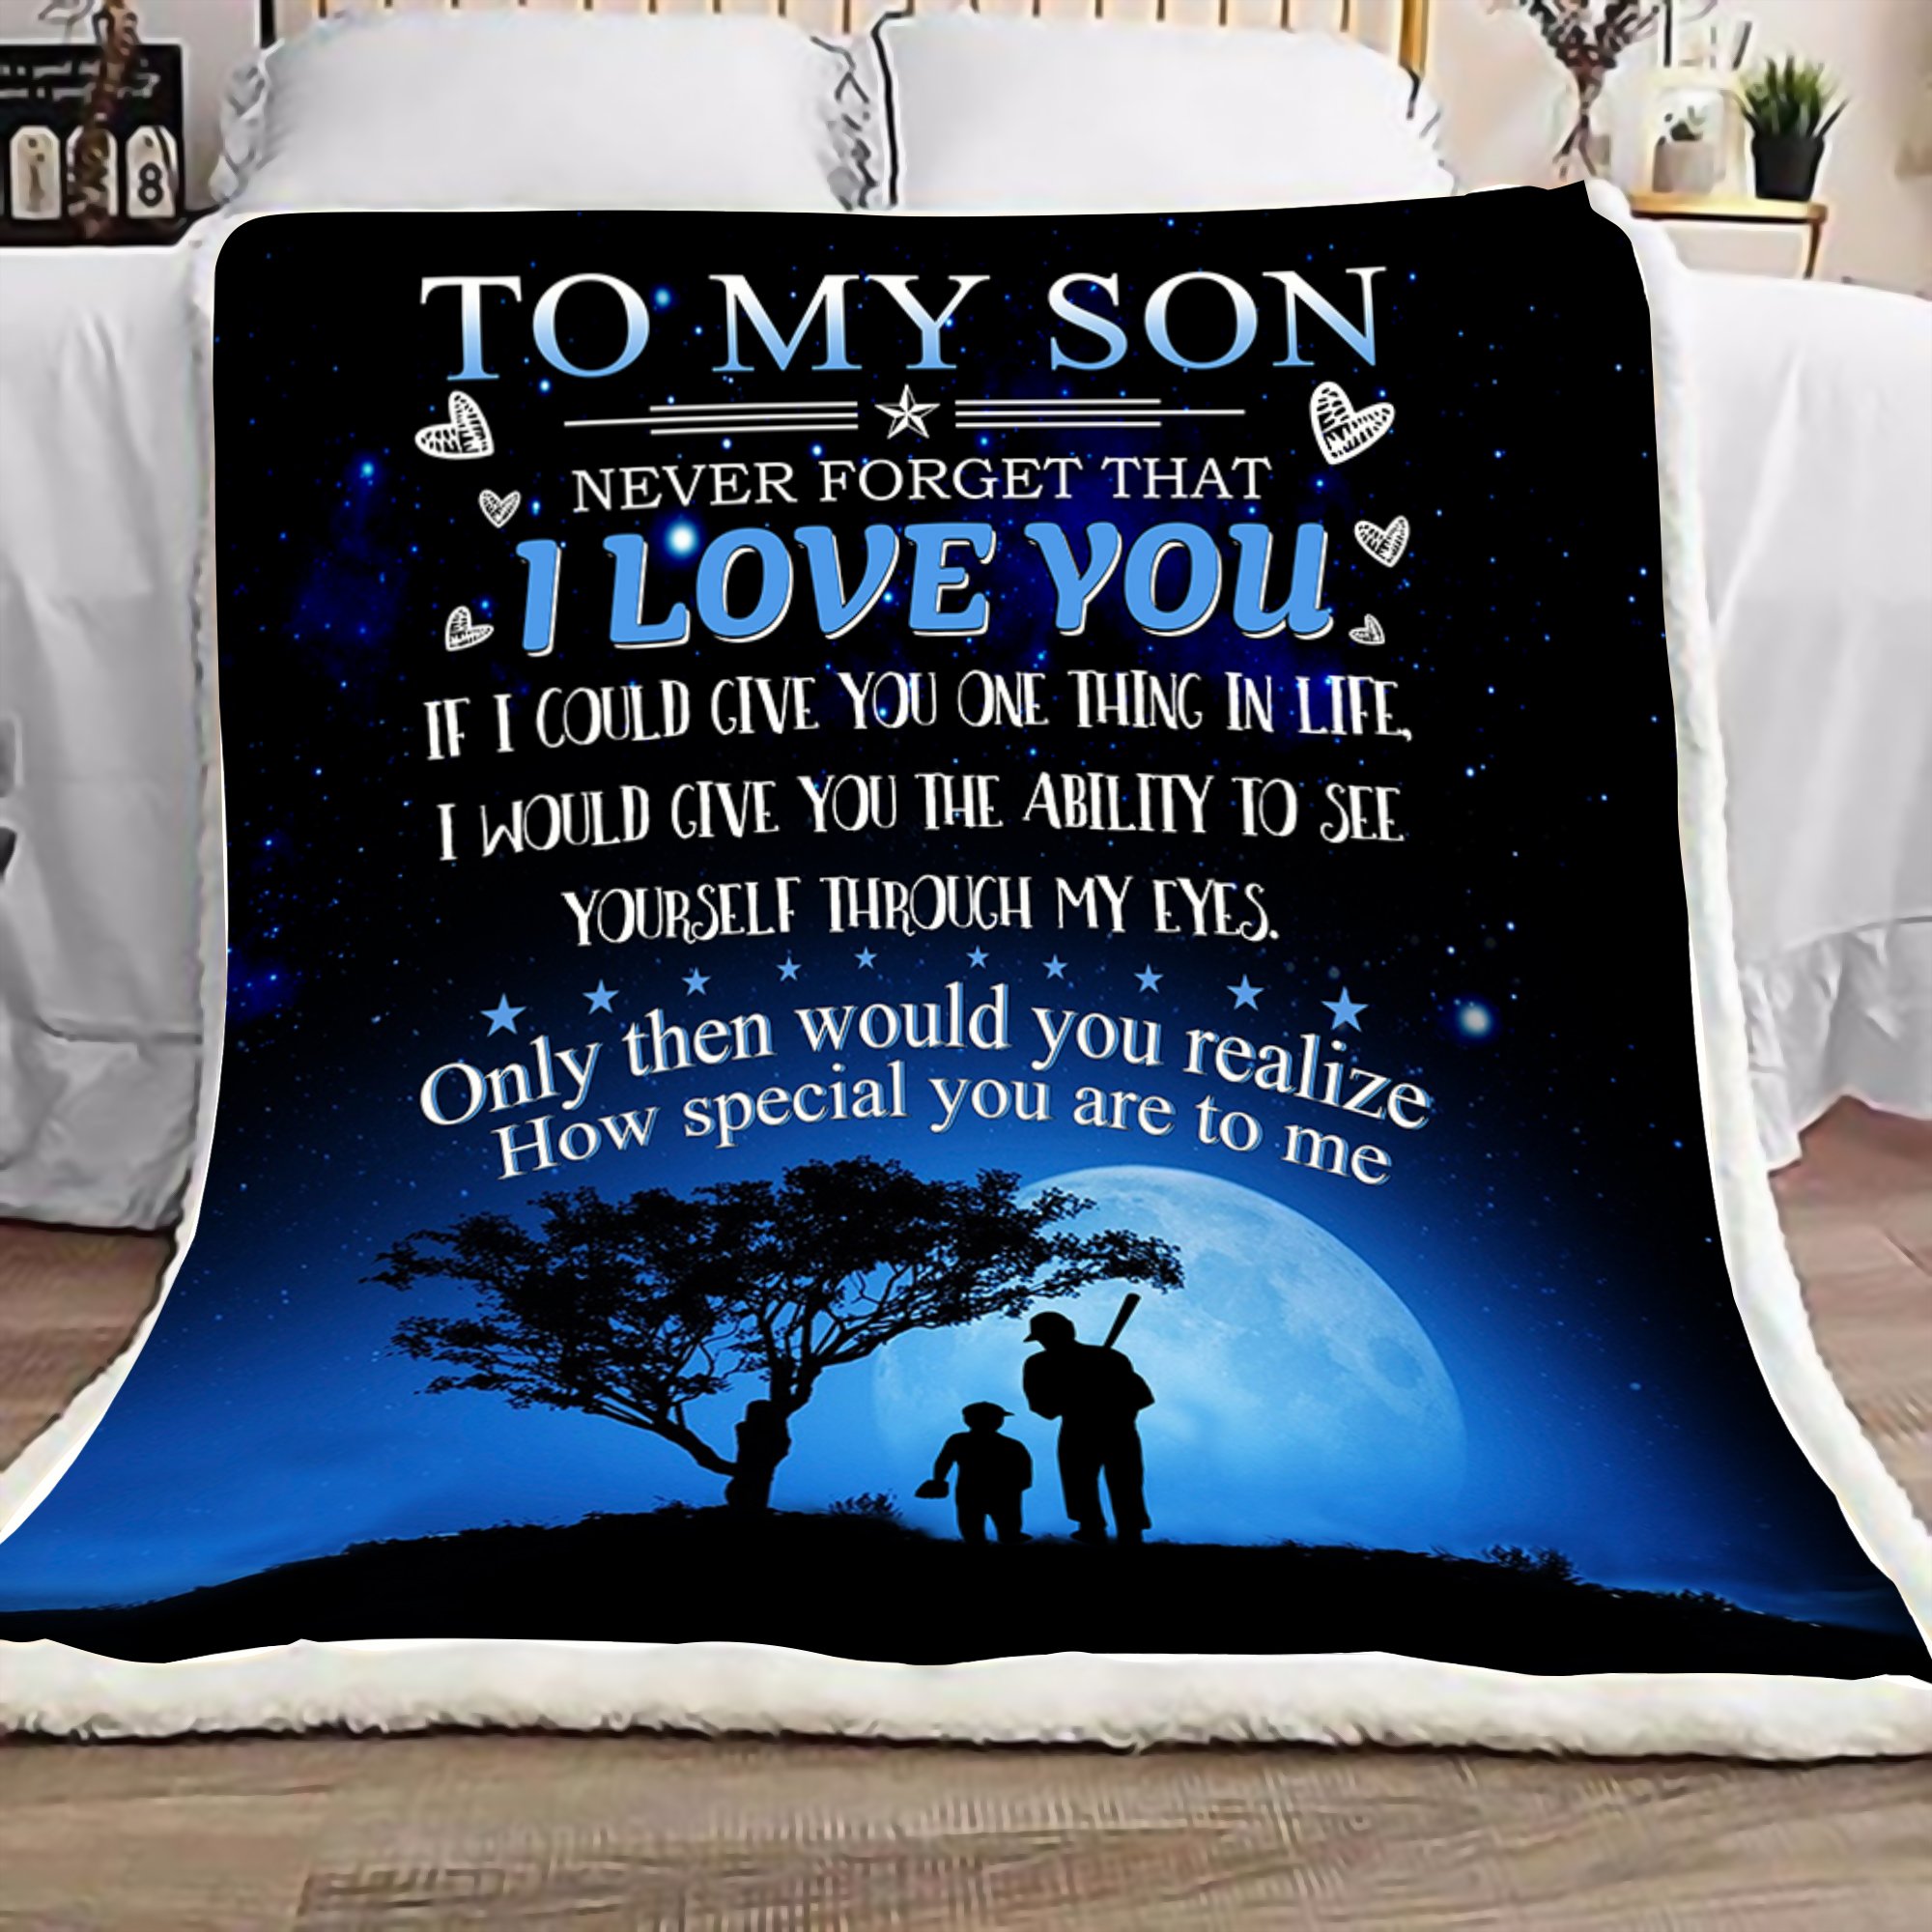 To my son never forget that i love you baseball blanket 1